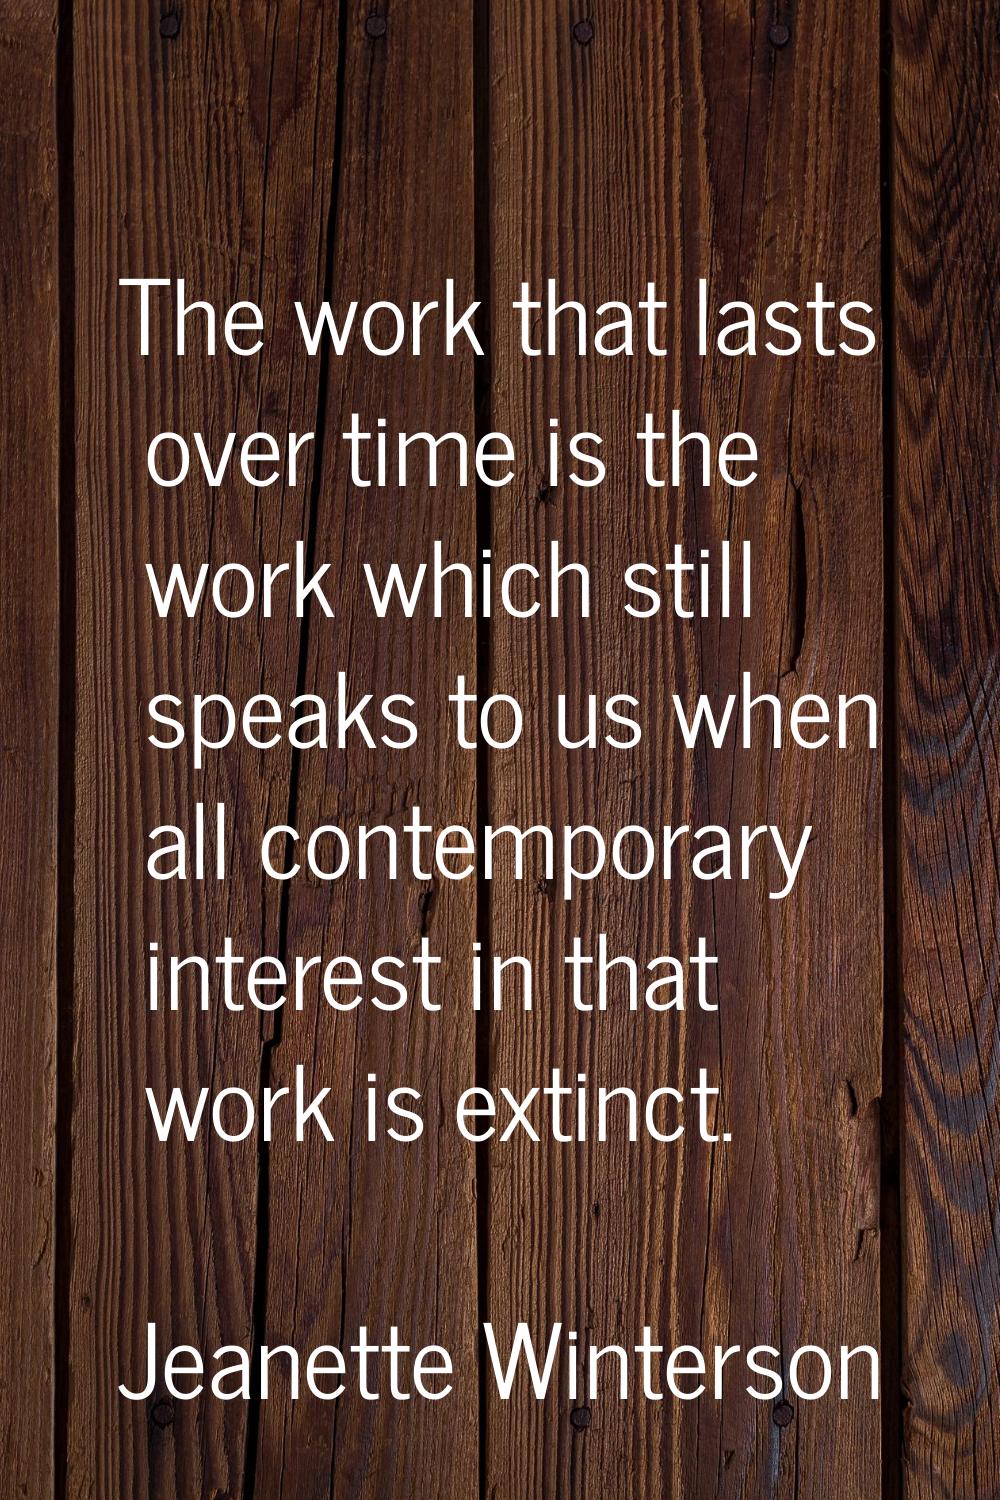 The work that lasts over time is the work which still speaks to us when all contemporary interest i